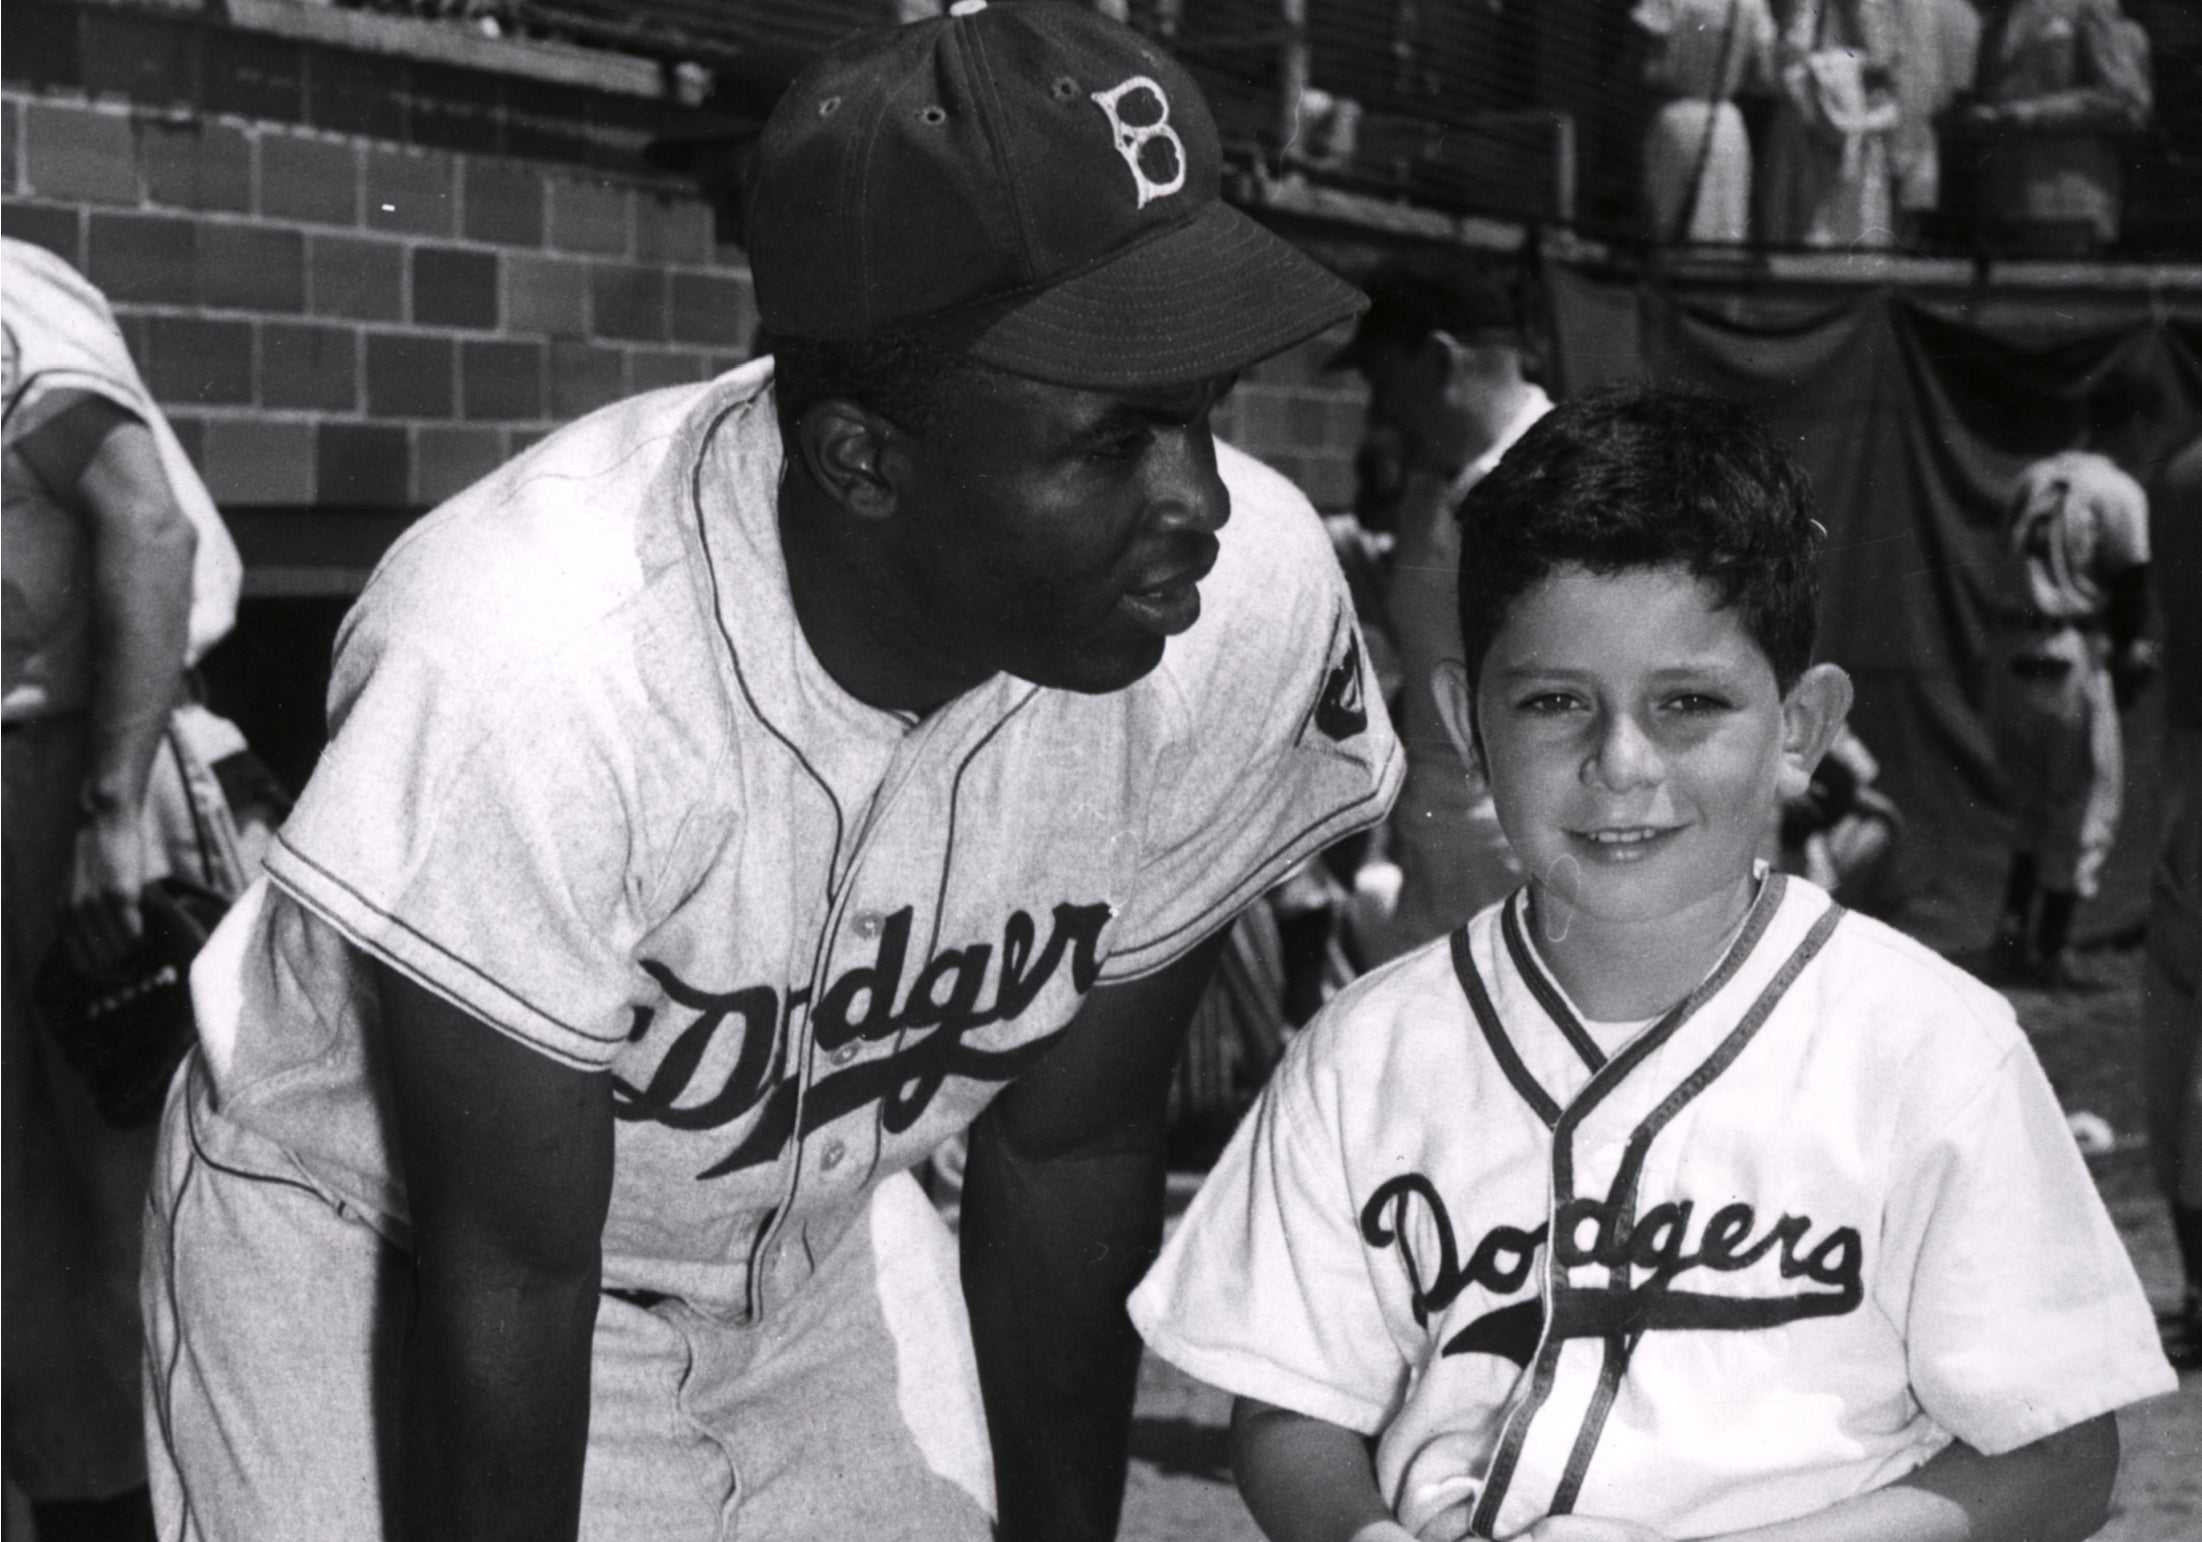 Jackie Robinson with a young fan